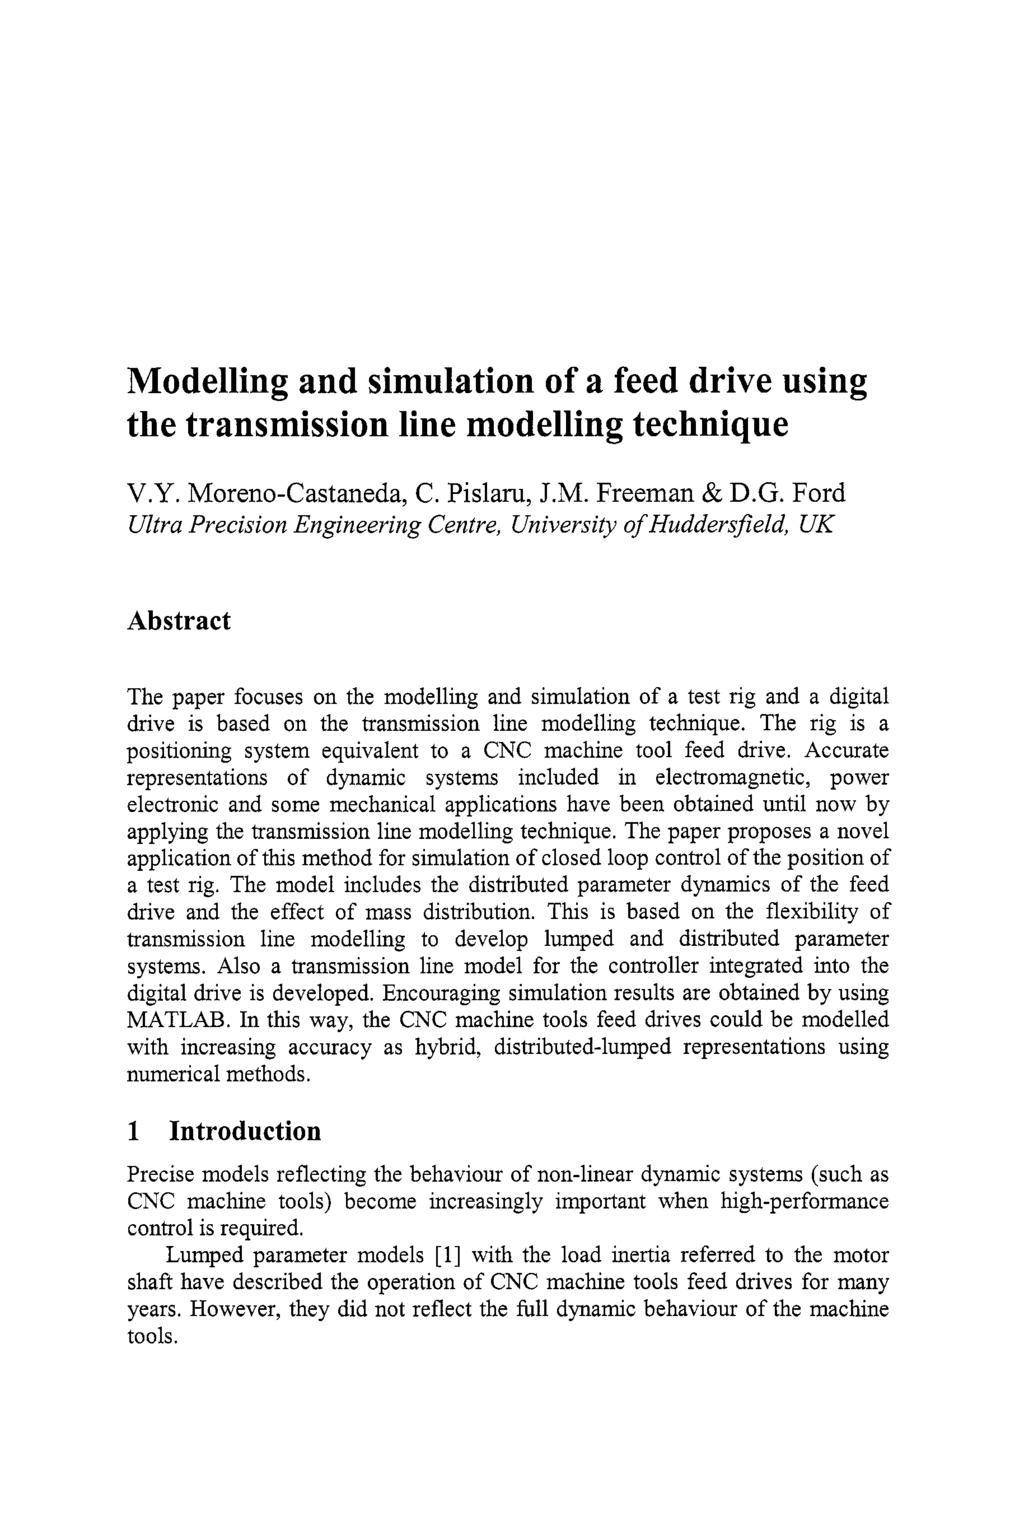 Transactions on Engineering Sciences vo 44, 2003 WT Press, www.witpress.com, SSN 1743-3533 Modeing and simuation of a feed drive using the transmission ine modeing technique V.Y. Moreno-Castaneda, C.